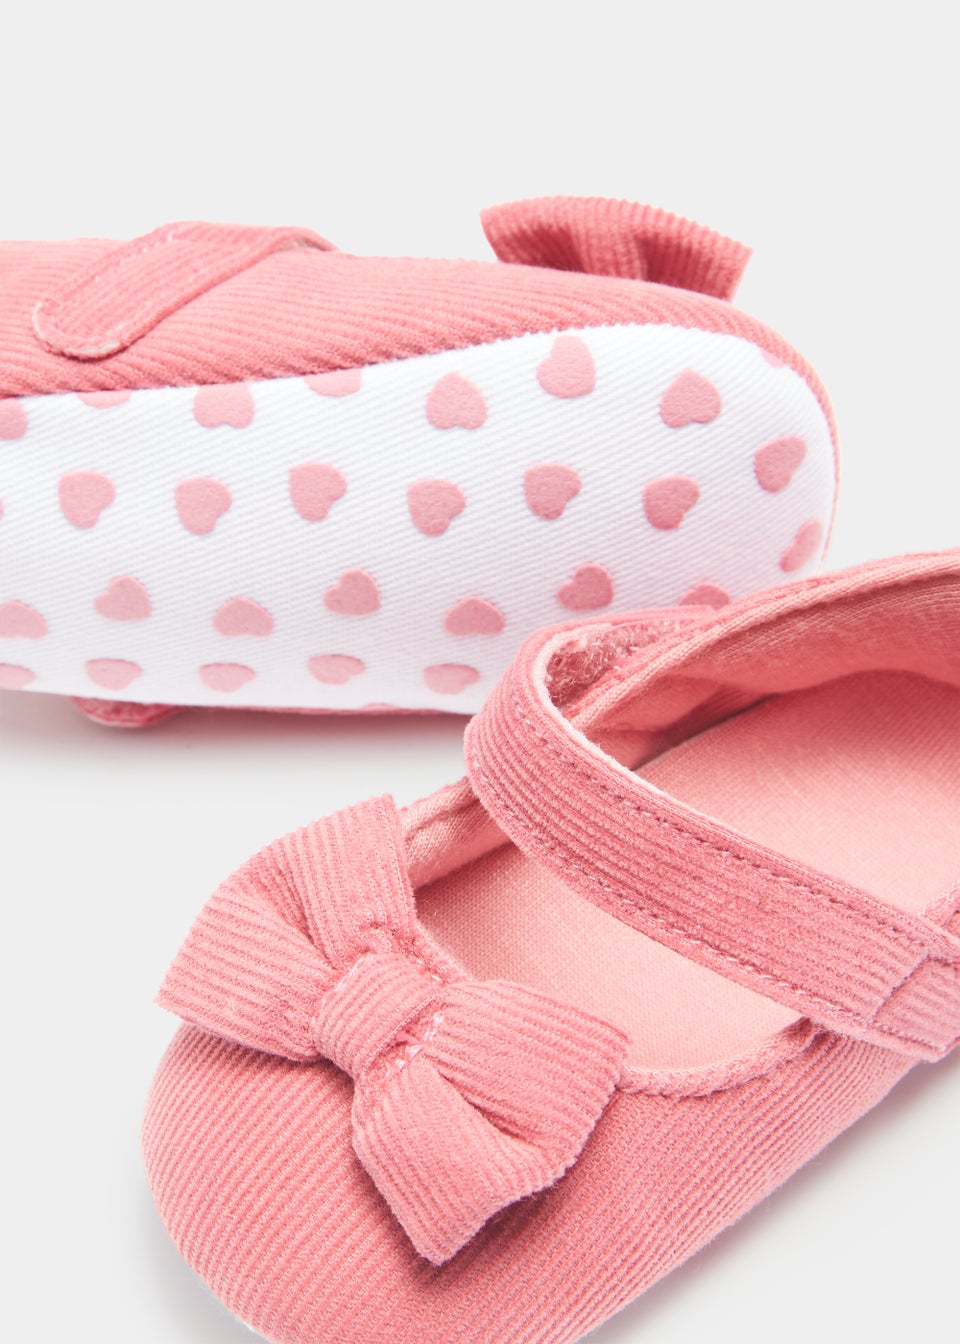 Pink Cord Soft Sole Baby Ballet Shoes (Newborn-18mths)